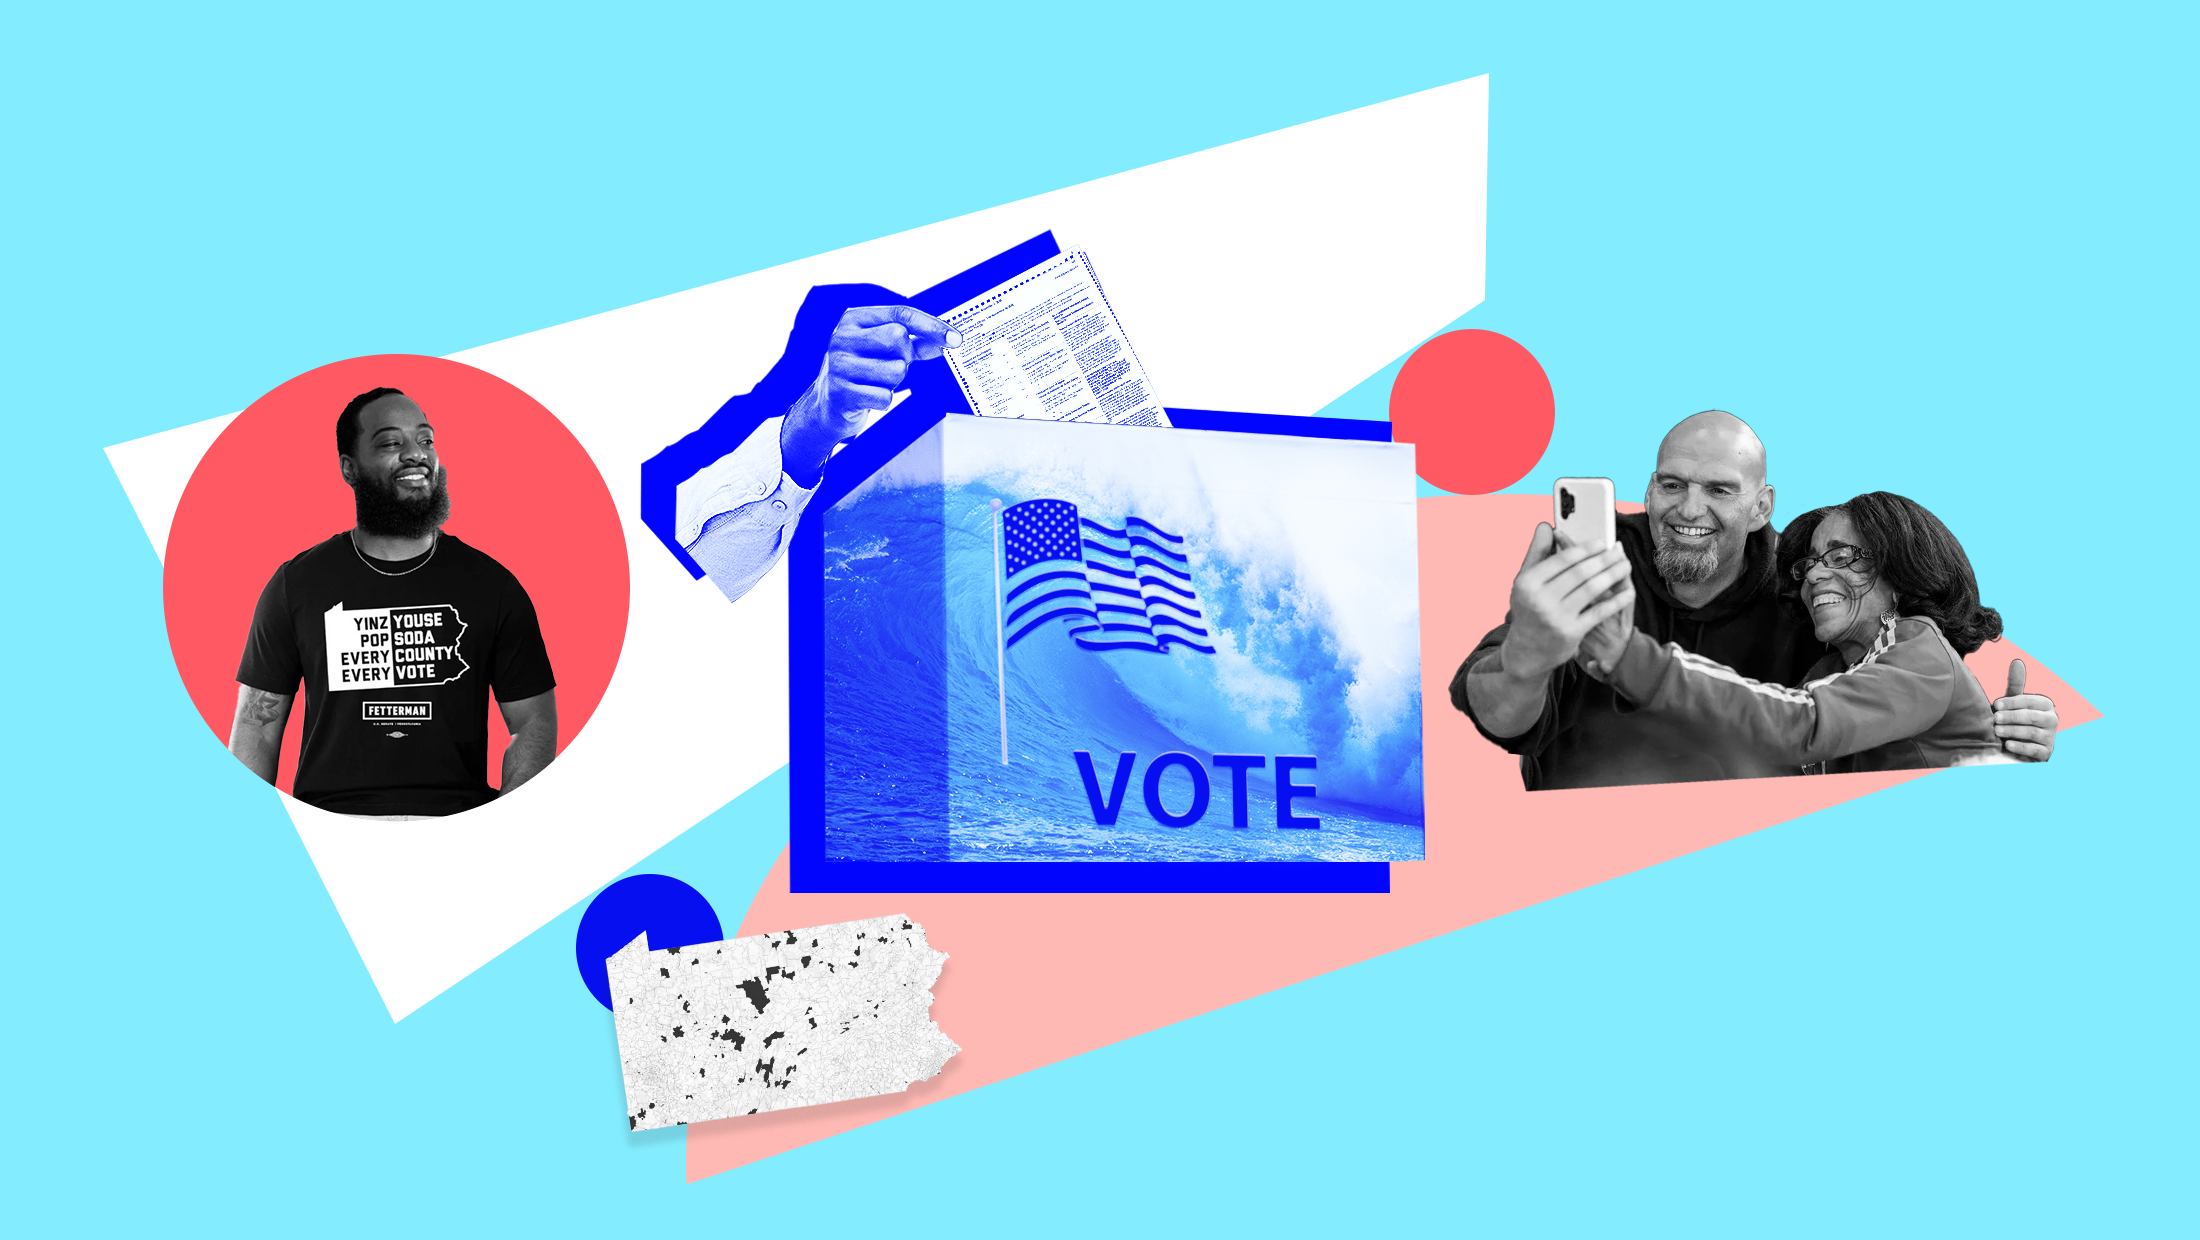 Light blue background with image of blue wave, an American flag and the word "VOTE" laid over a ballot box and someone inserting their ballot into the box, a black and white image of someone wearing a Fetterman campaign shirt that reads "YINZ YOUSE POP SODA EVERY COUNTY EVERY VOTE," a black and white image of John Fetterman taking a selfie with someone and a white map of Pennsylvania with some counties highlighted in black.